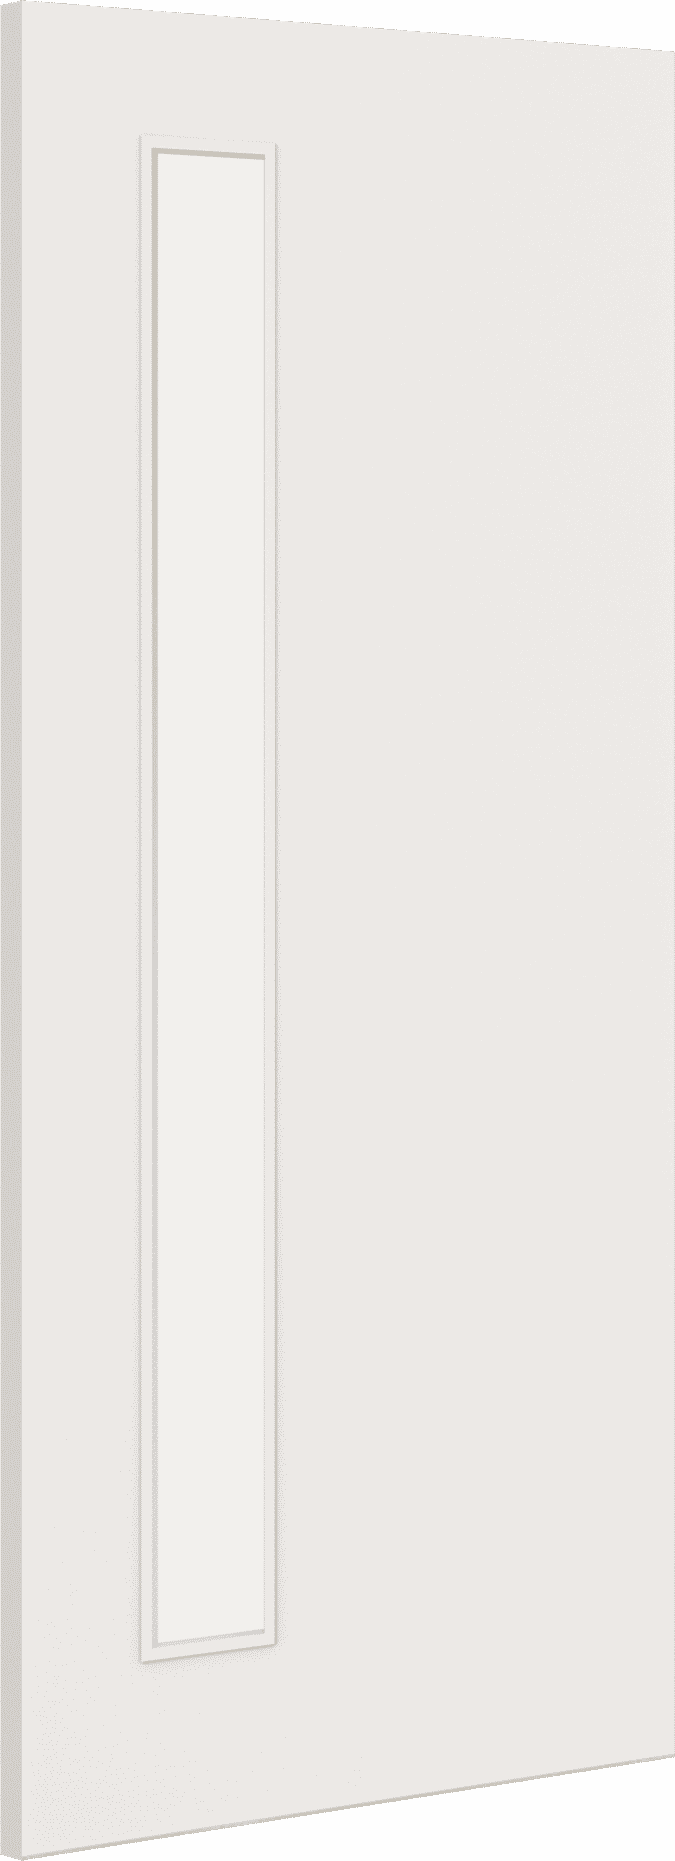 2040mm x 726mm x 44mm Architectural Paint Grade White 06 Clear Glazed Fire Door Blank